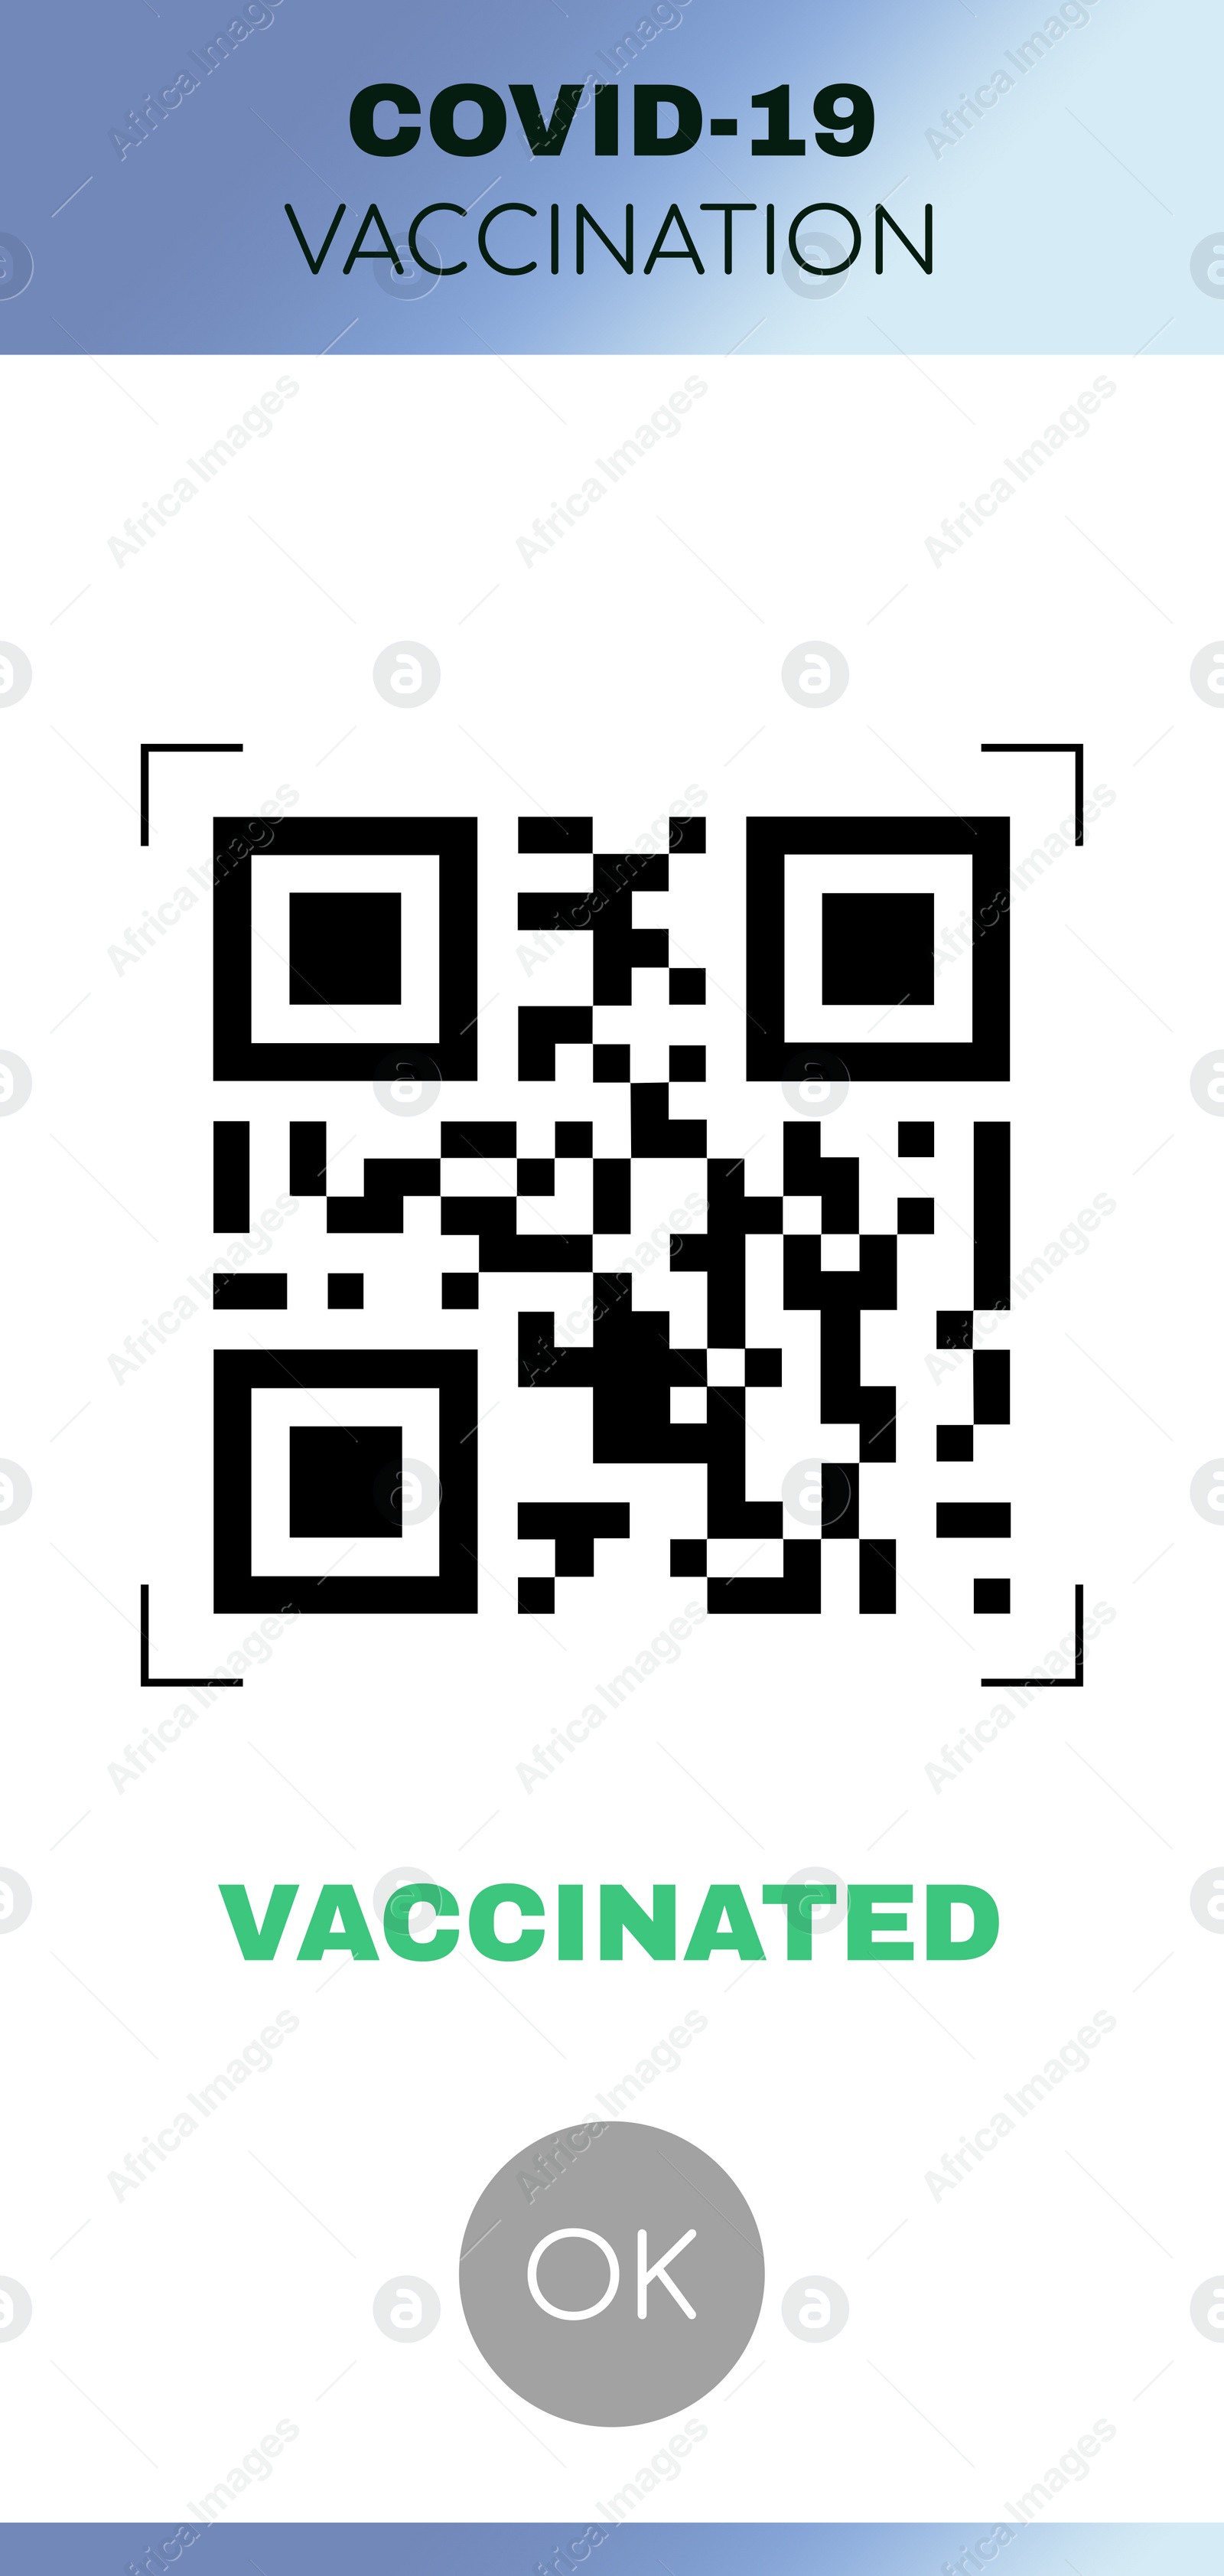 Illustration of Electronic COVID-19 vaccination certificate with QR code, illustration